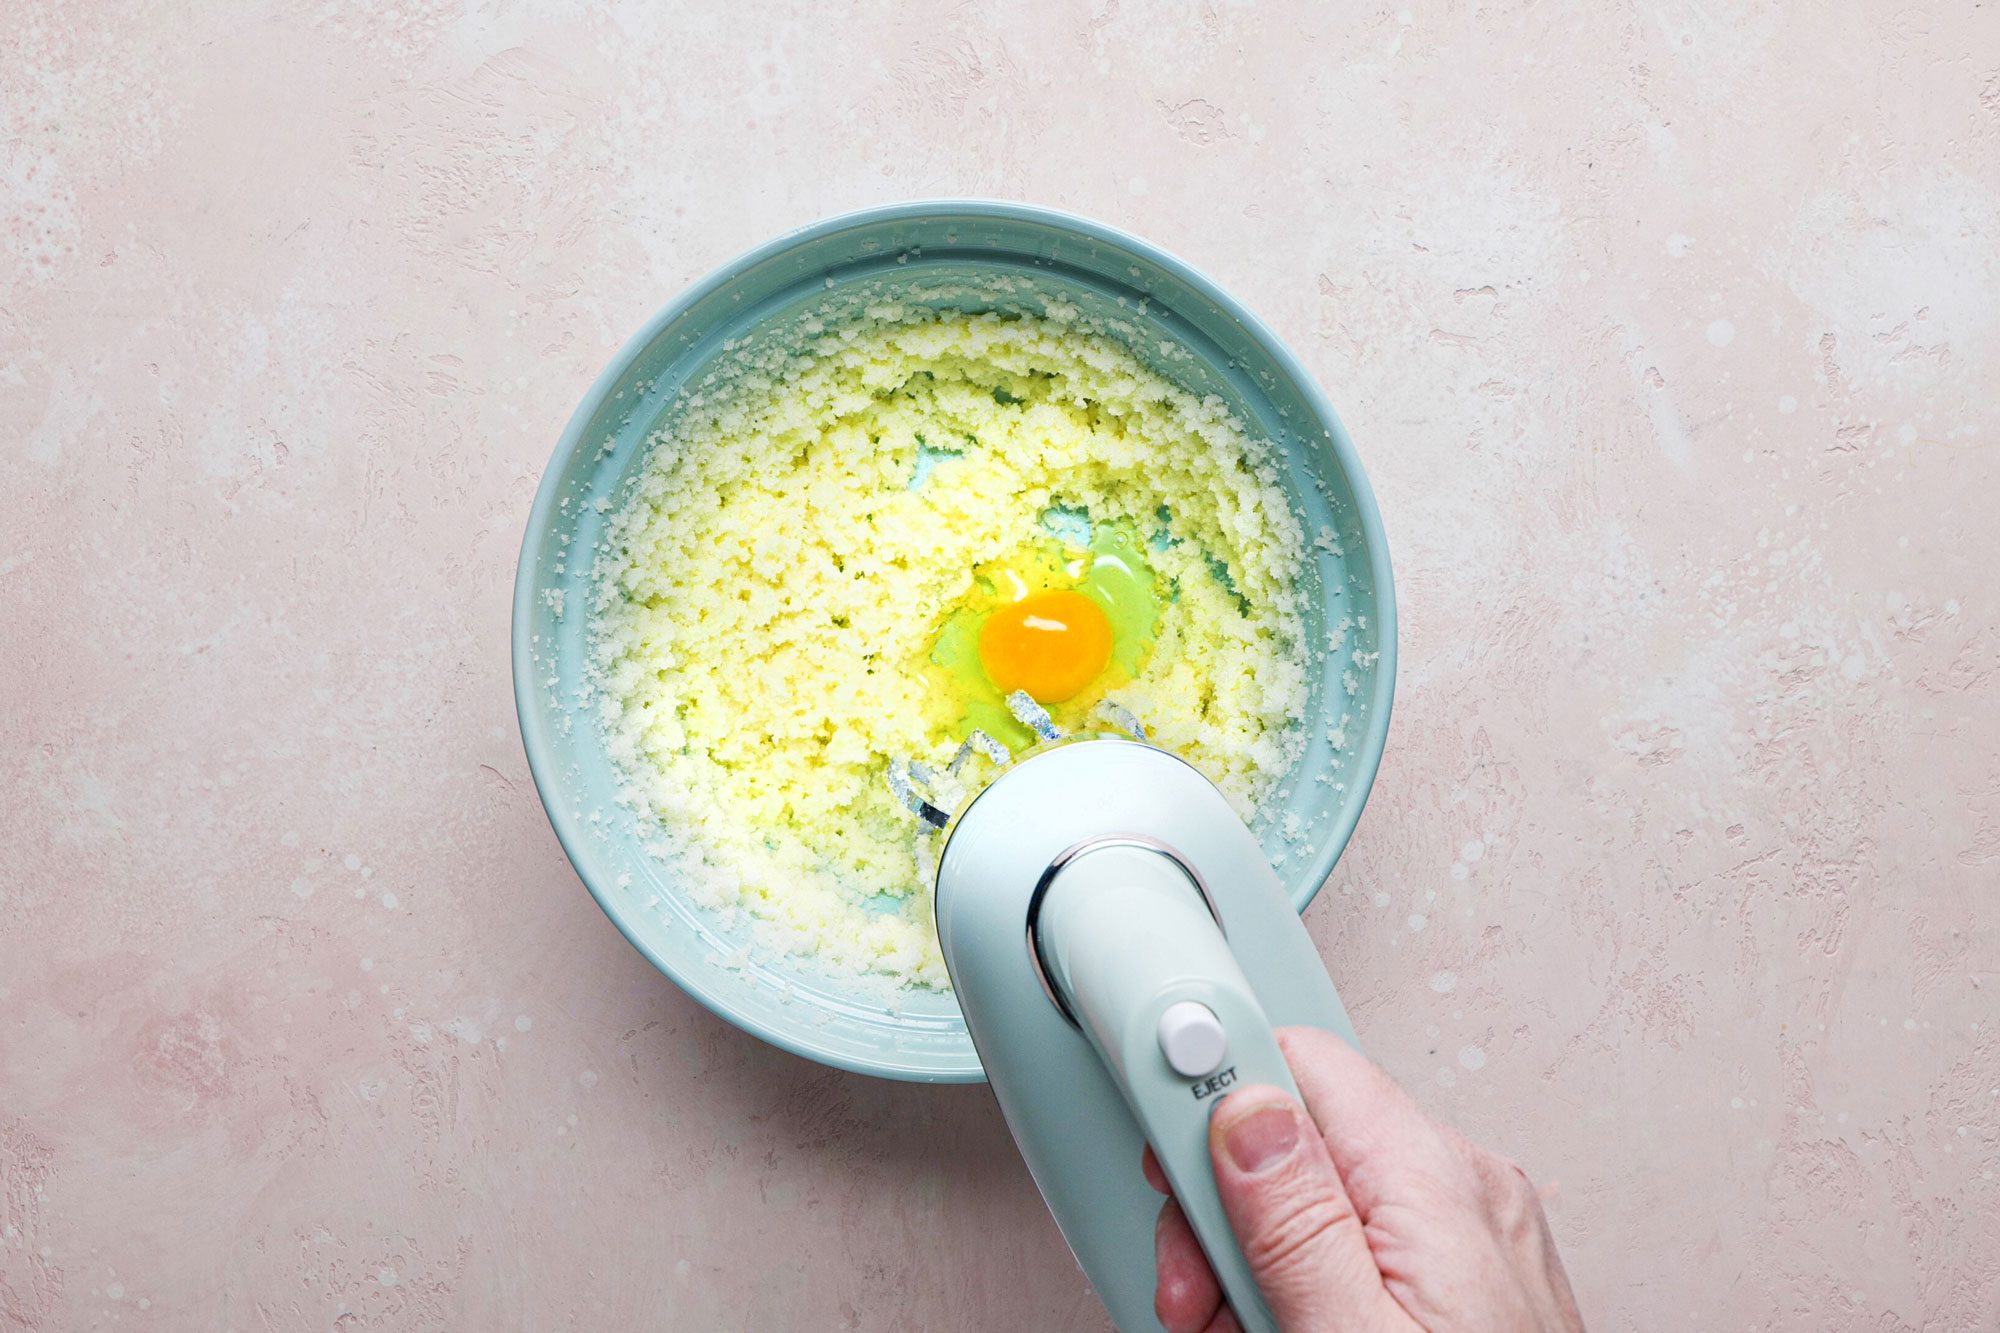 Mix in the eggs and vanilla extract with stand mixer in a bowl